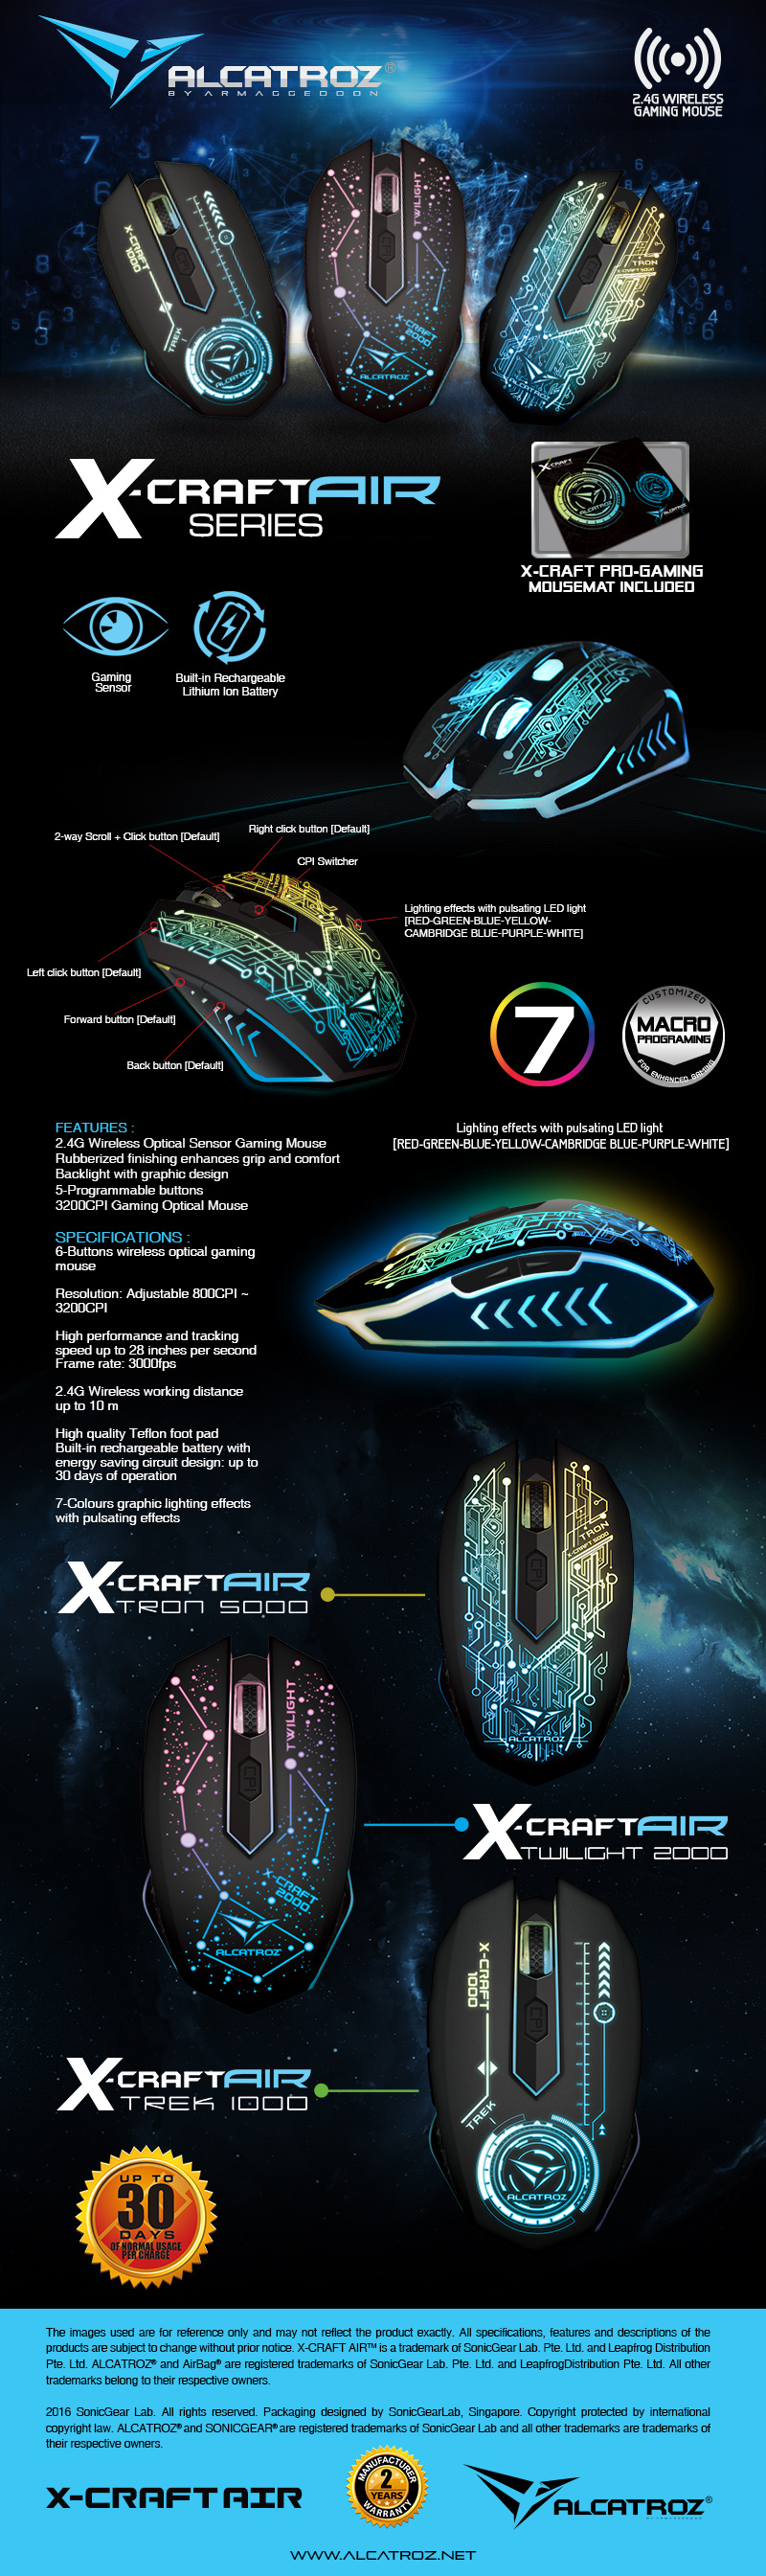 Mouse-Mouse-Pads-Alcatroz-X-Craft-Air-Tron-5000-7-Color-Wireless-Gaming-Optical-Mouse-2